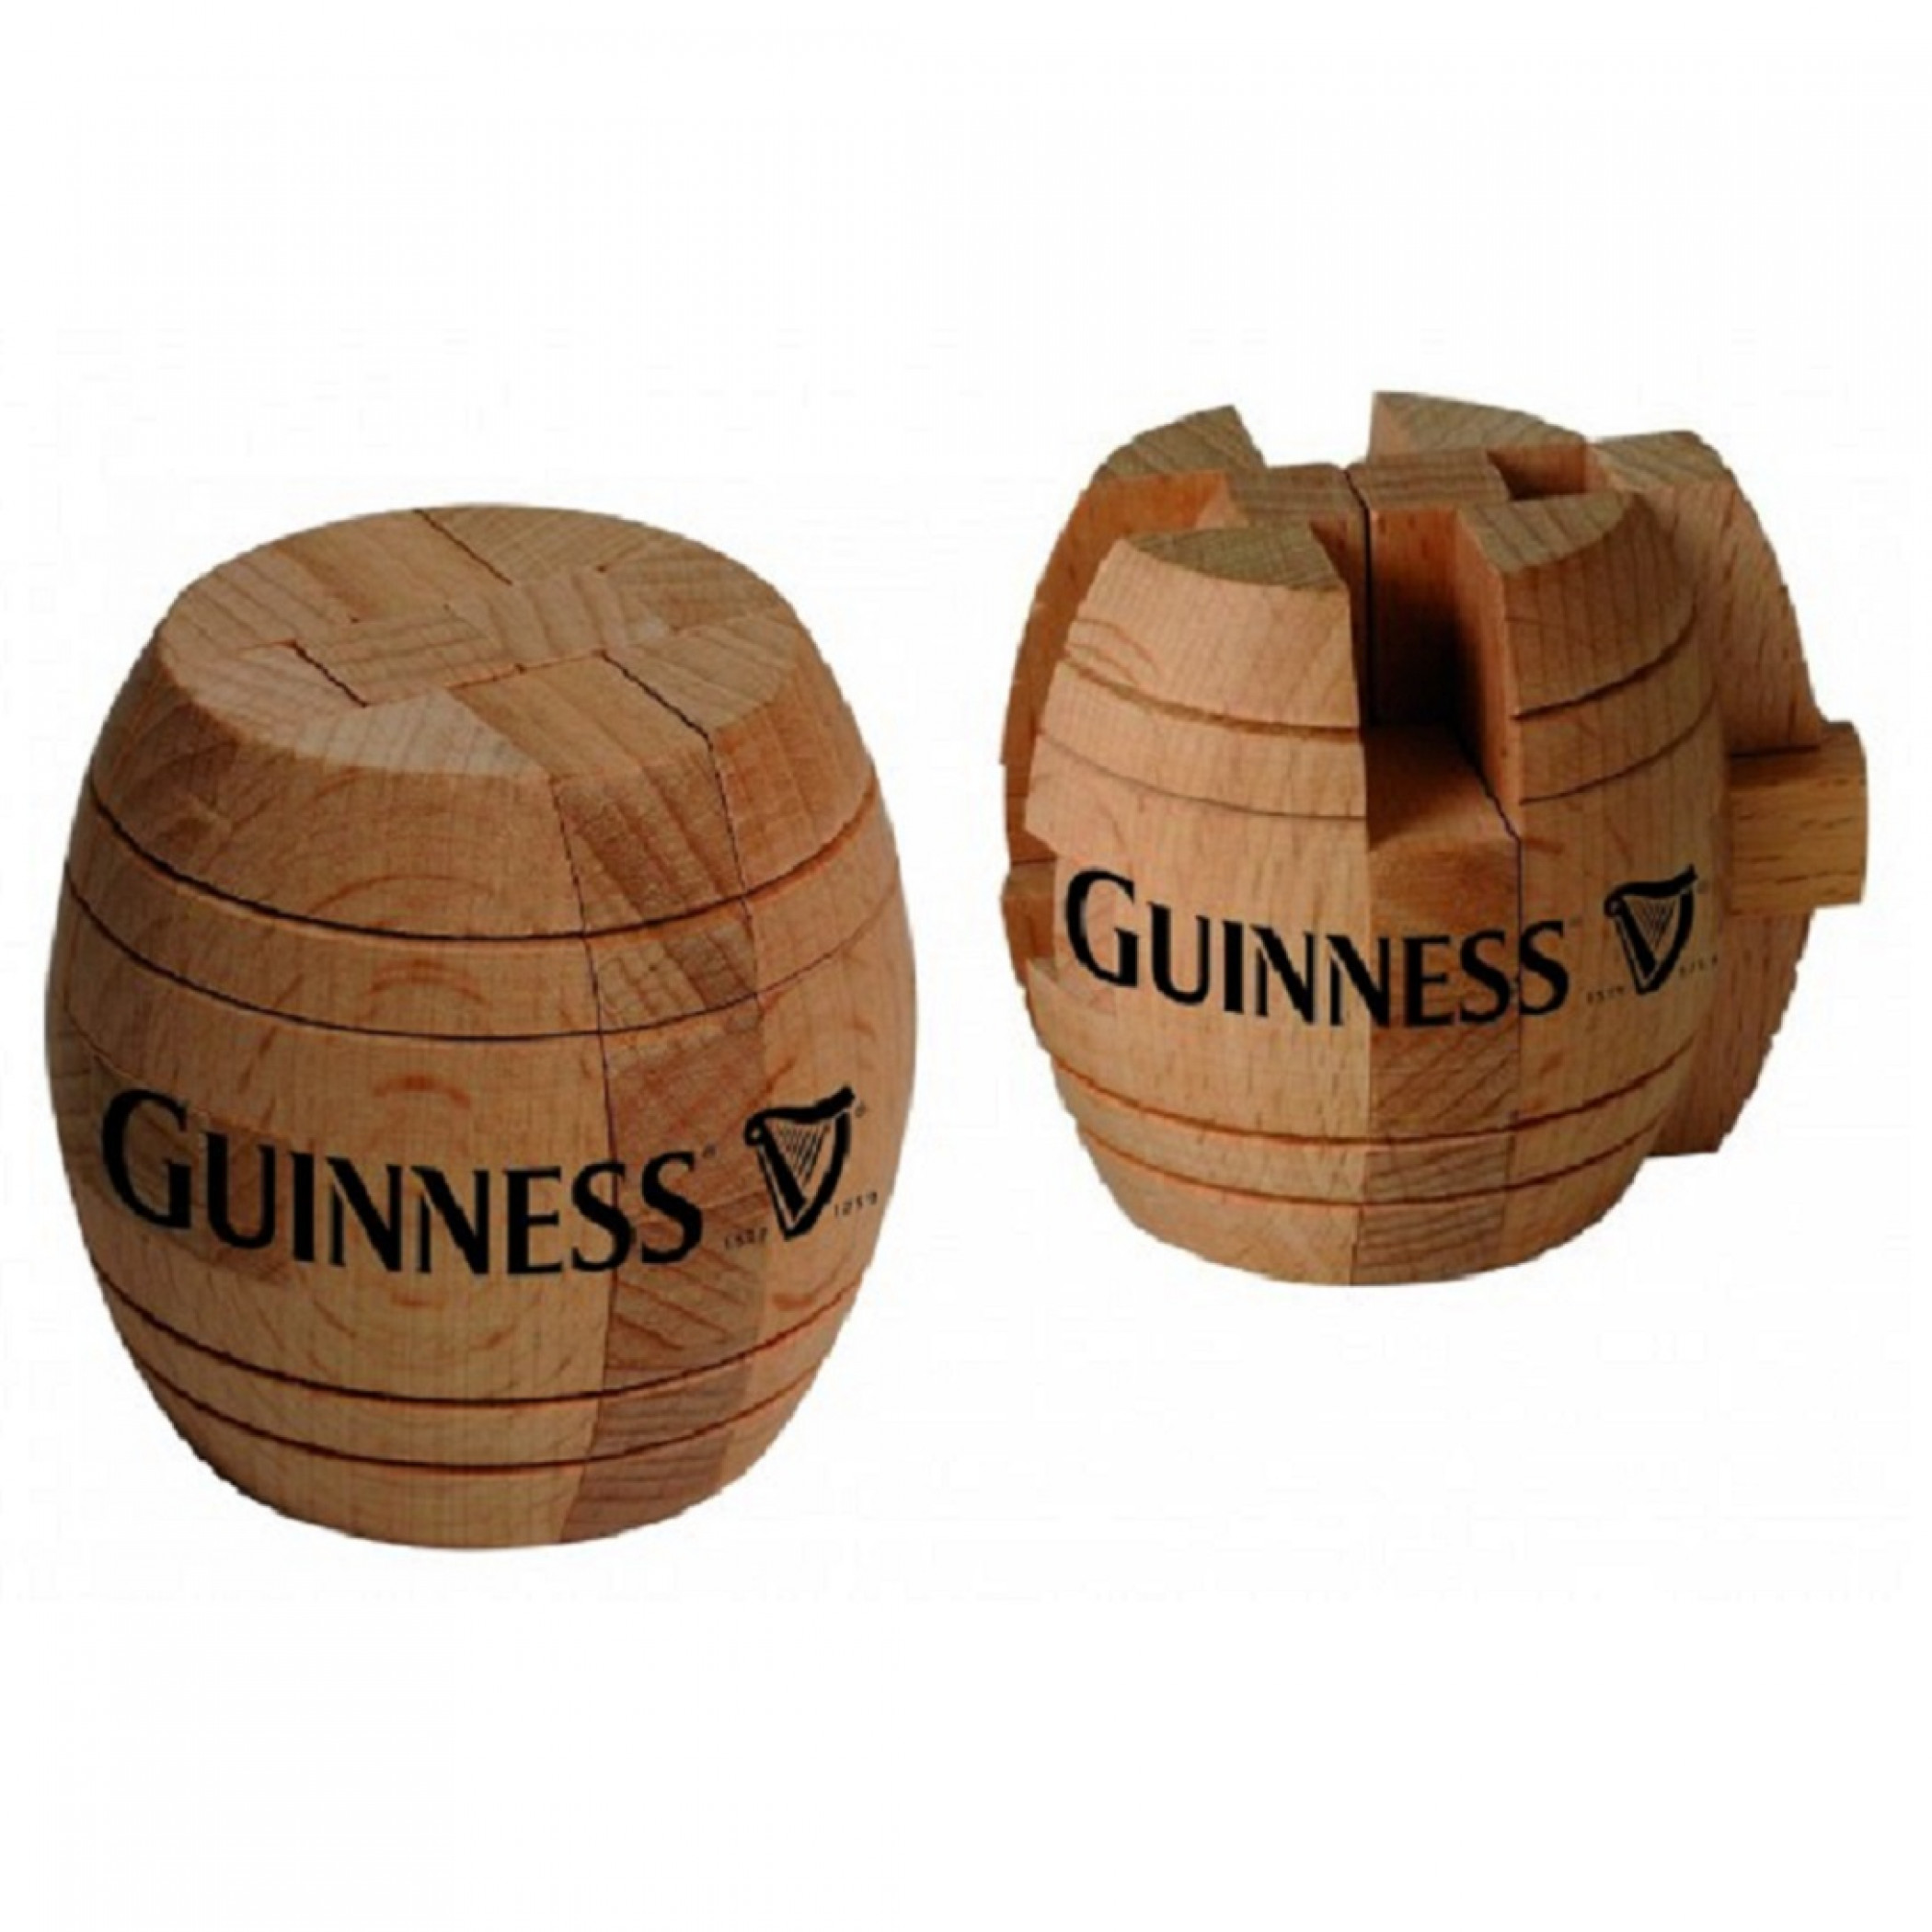 Guinness Barrel Wooden Puzzle